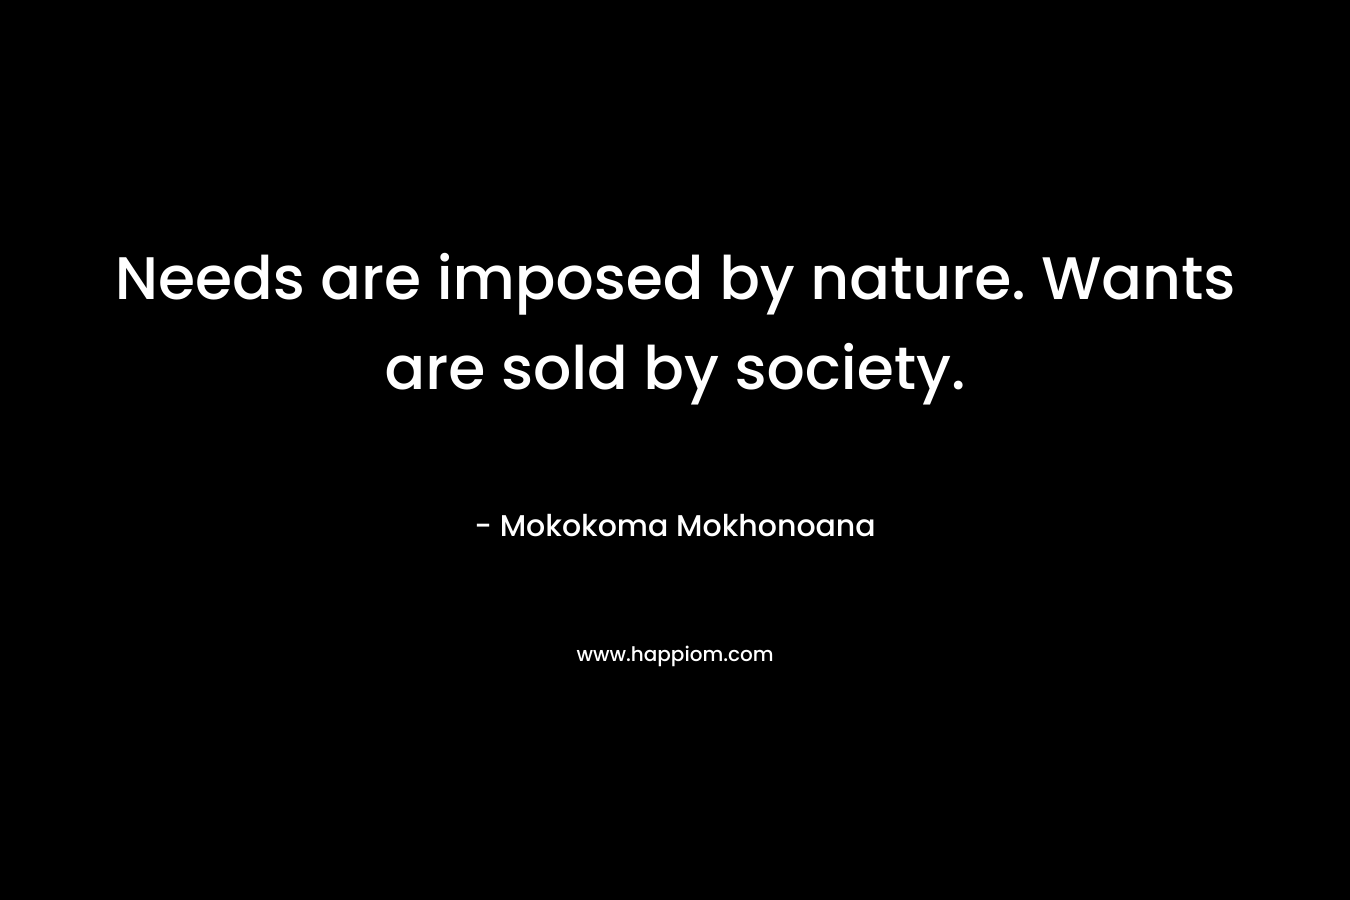 Needs are imposed by nature. Wants are sold by society.